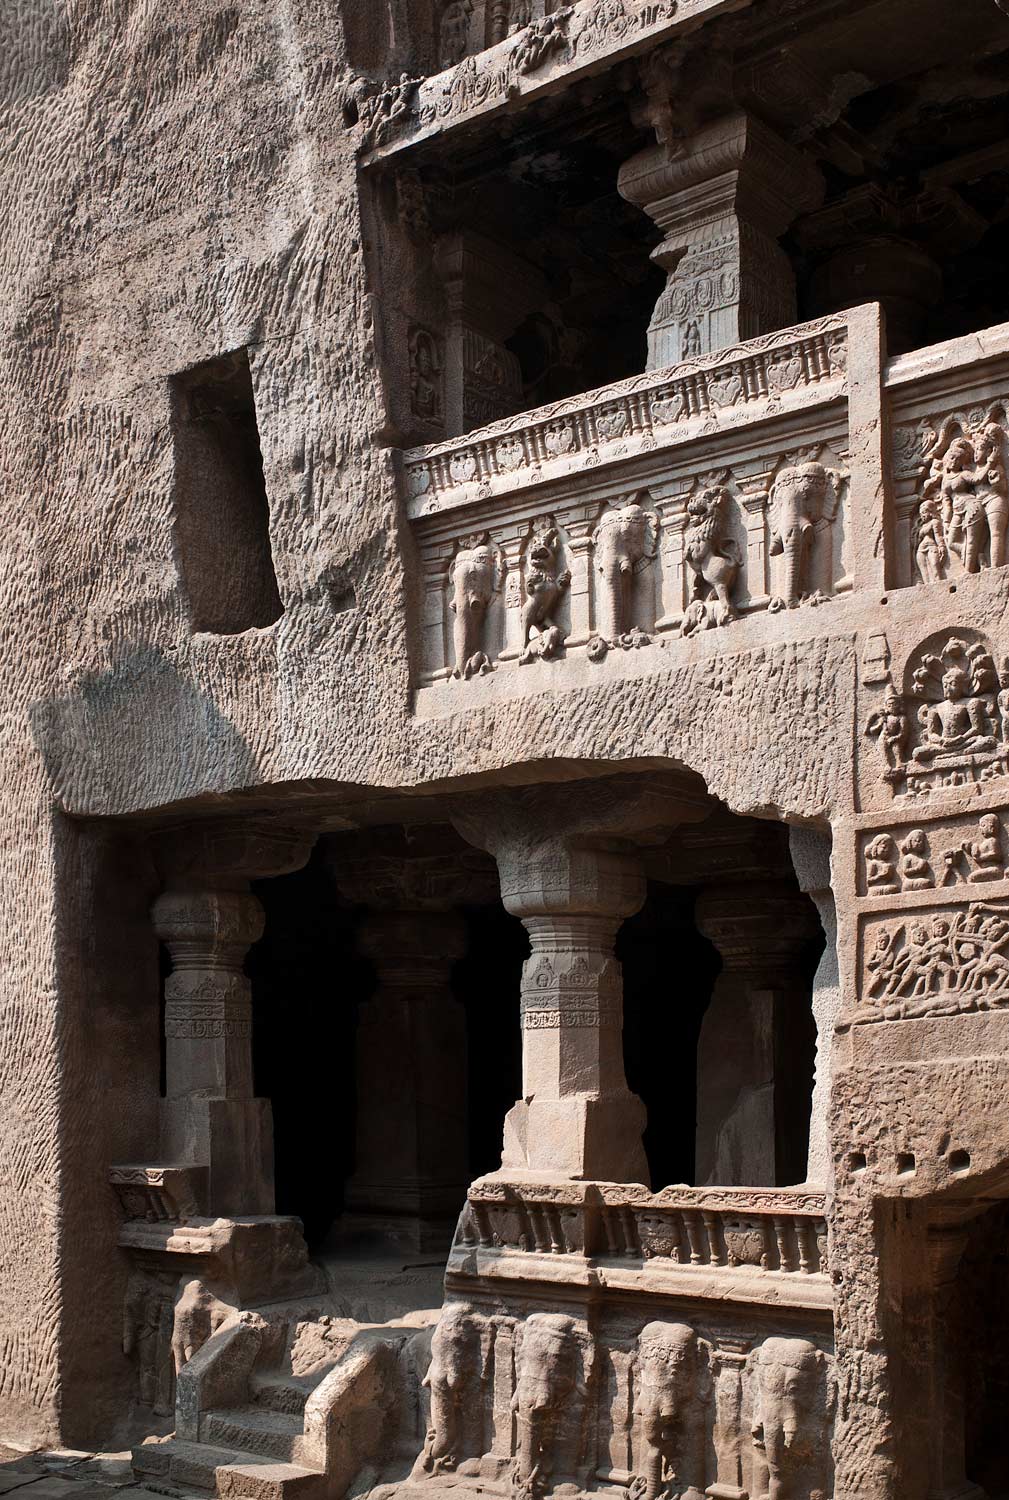 A miniature version of the Kailash temple